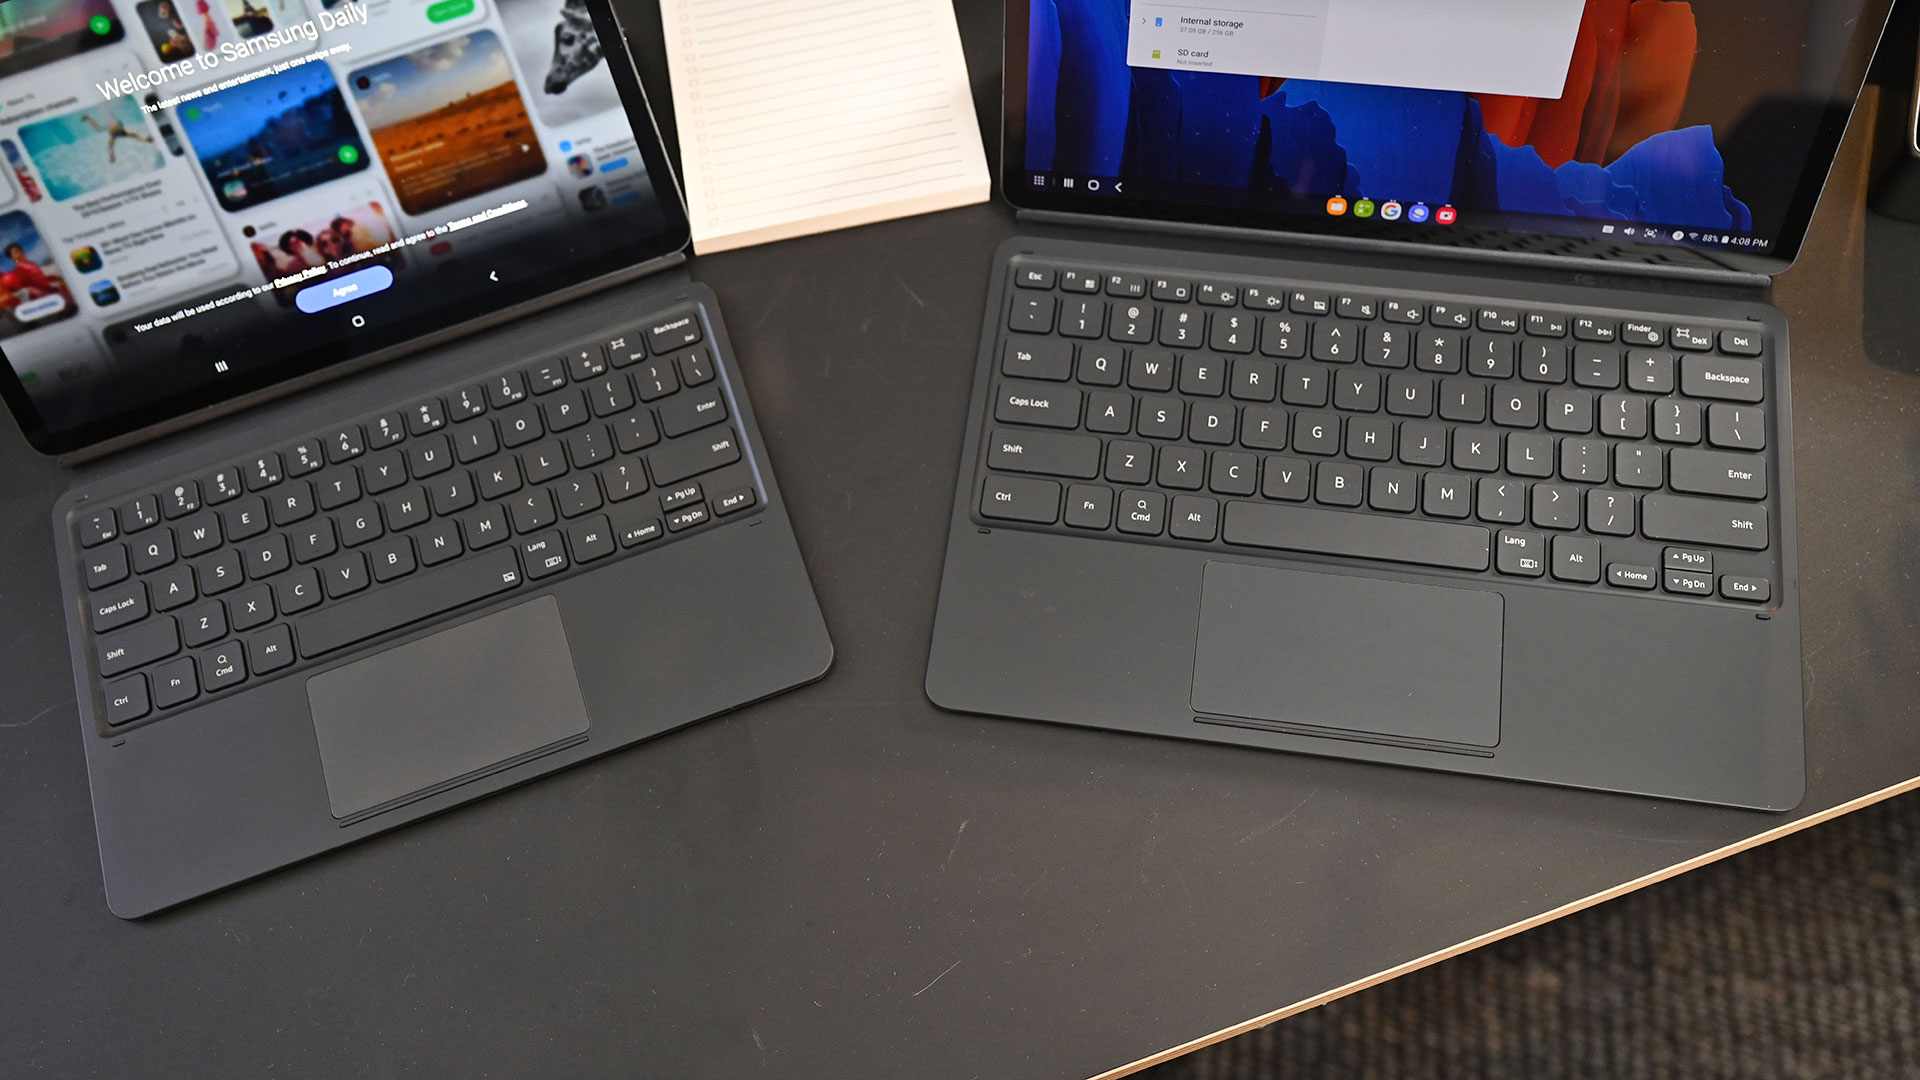 When it comes to productivity, the Tab S7+'s larger screen and extra row of keys should make it a more capable choice. (Photo: Sam Rutherford/Gizmodo)